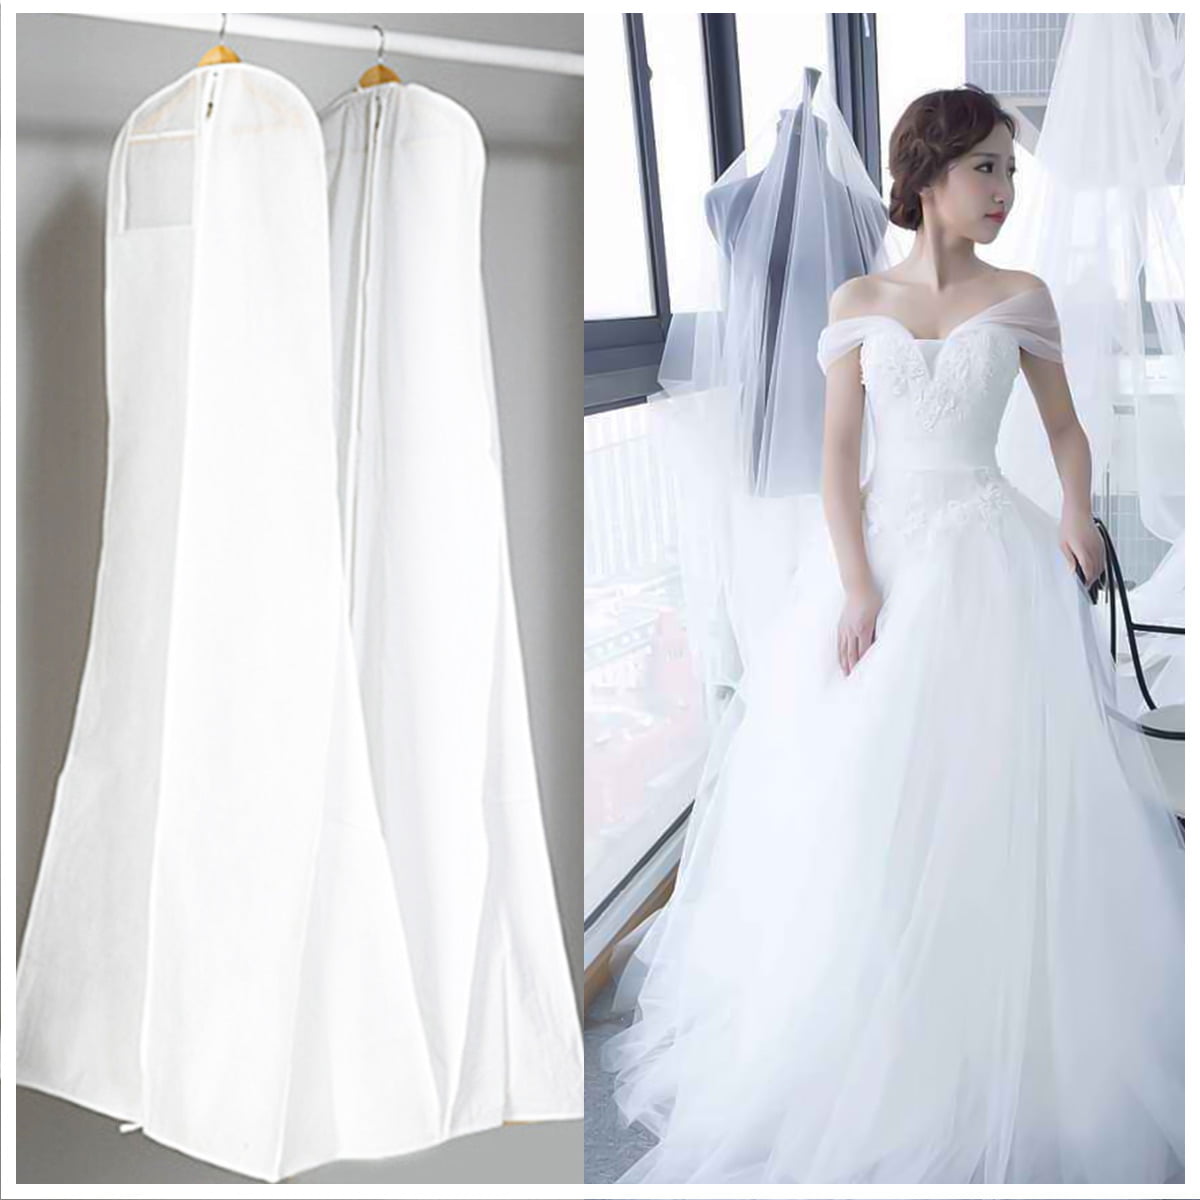 72" Breathable Long Wedding Dress Cover Prom Bridal Gown Garment Storage Zip Bag